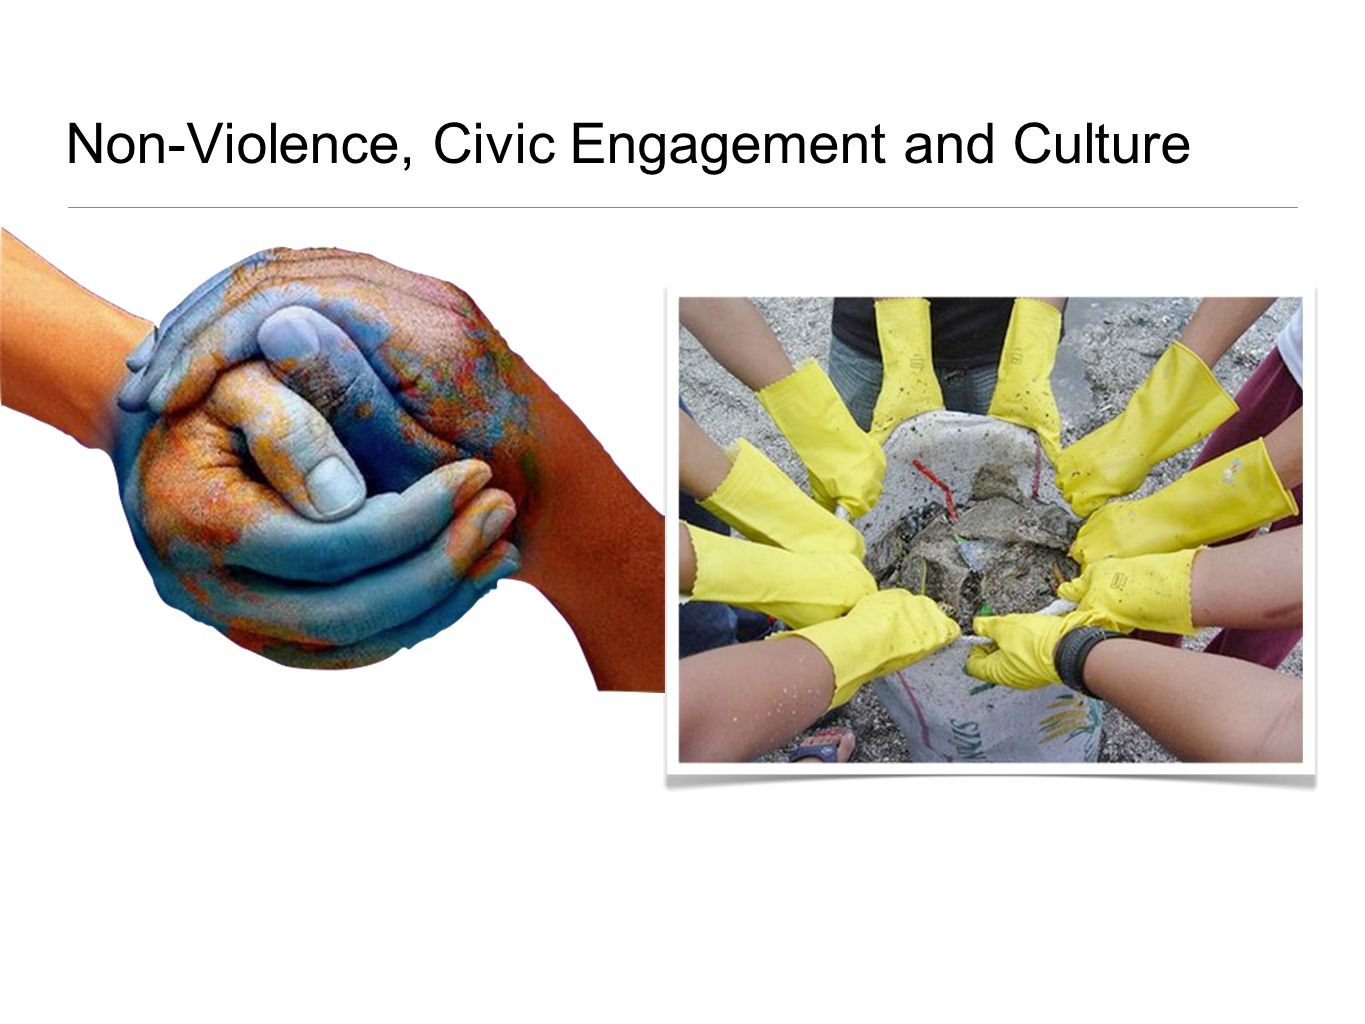 Non-Violence, Civic Engagement and Culture